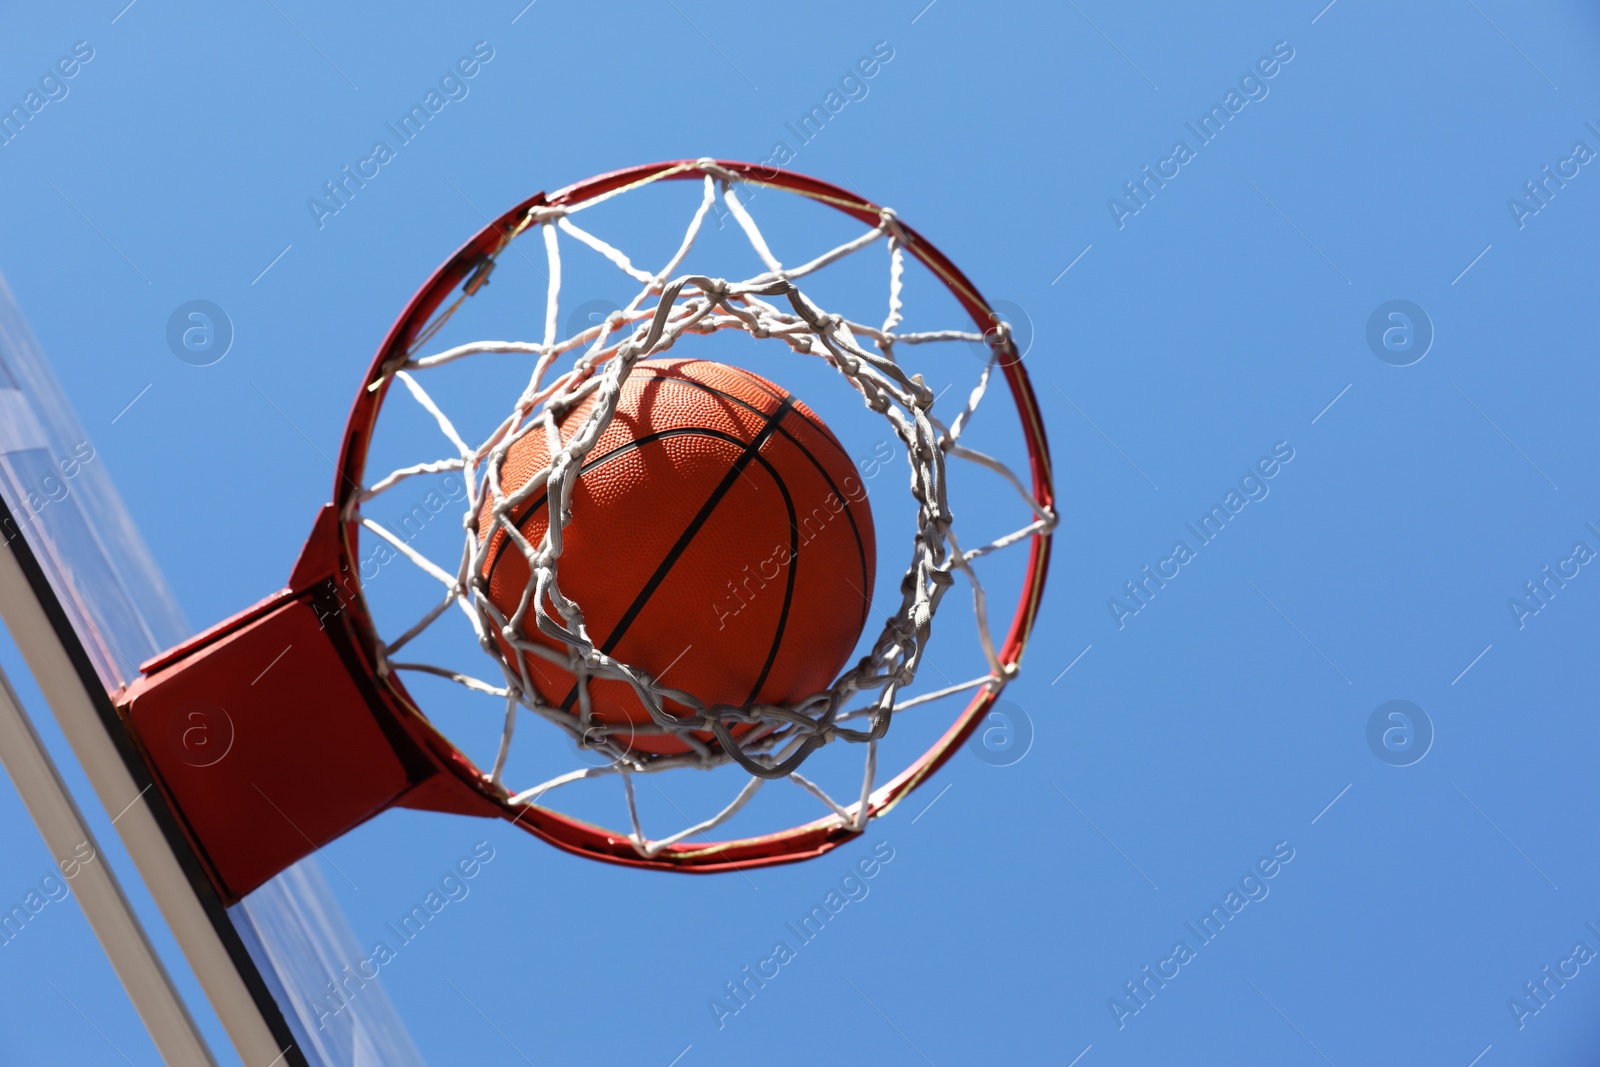 Photo of Basketball ball and hoop with net outdoors on sunny day, bottom view